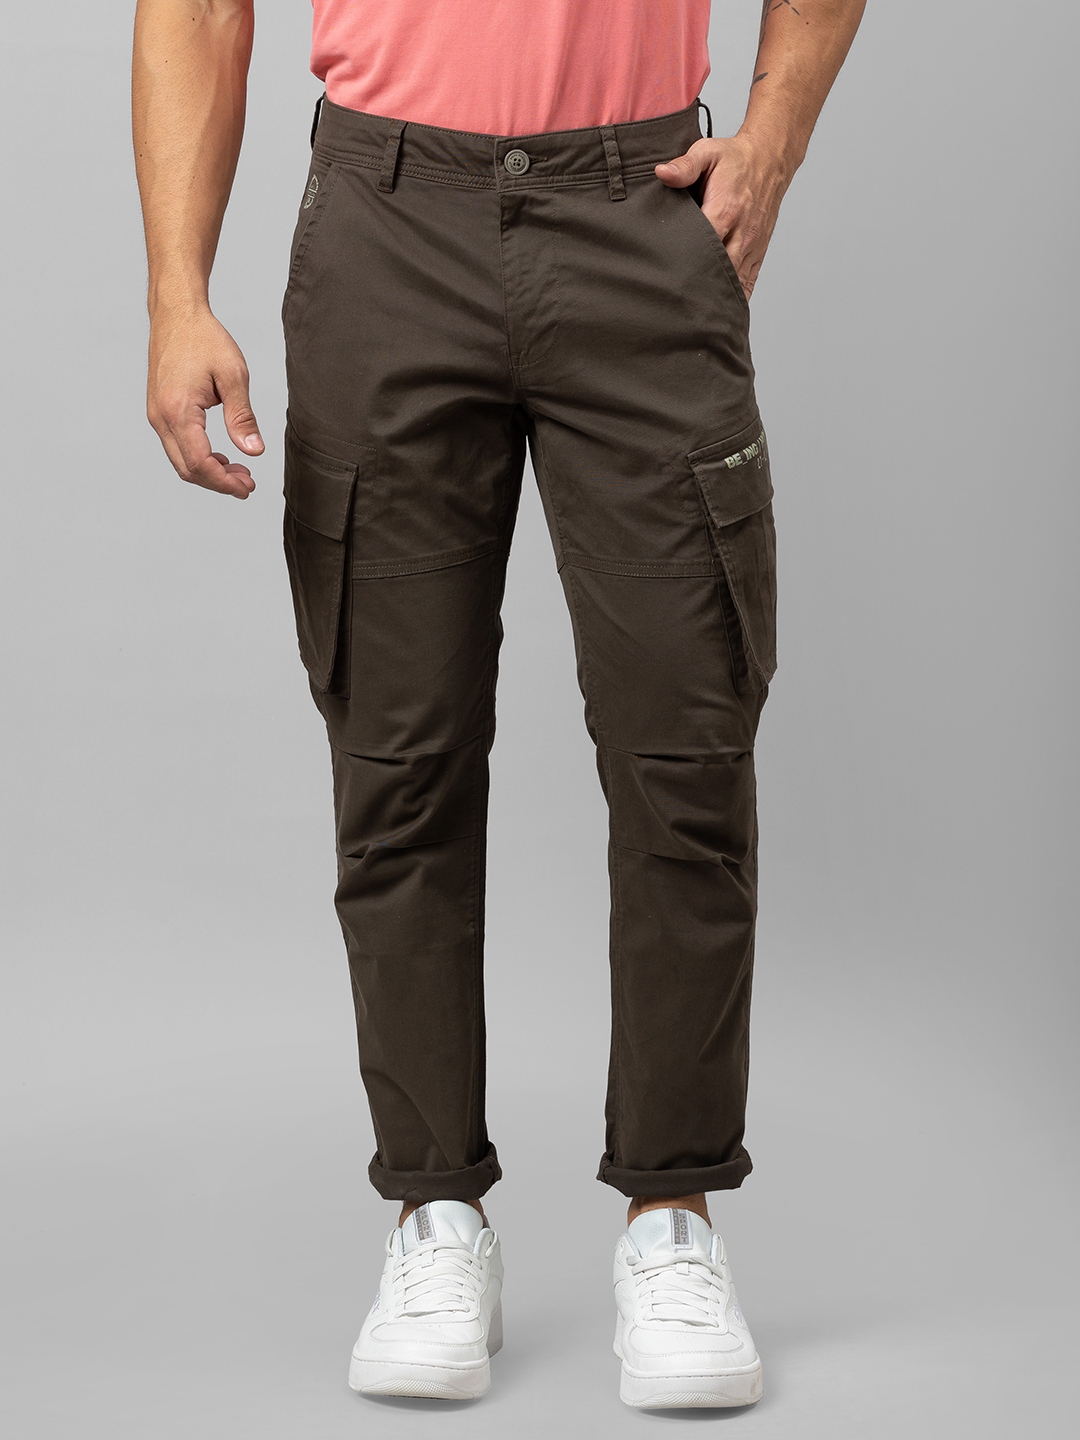 Buy Men's Being Human Printed Jog Pants with Drawstring Online |  Centrepoint Qatar